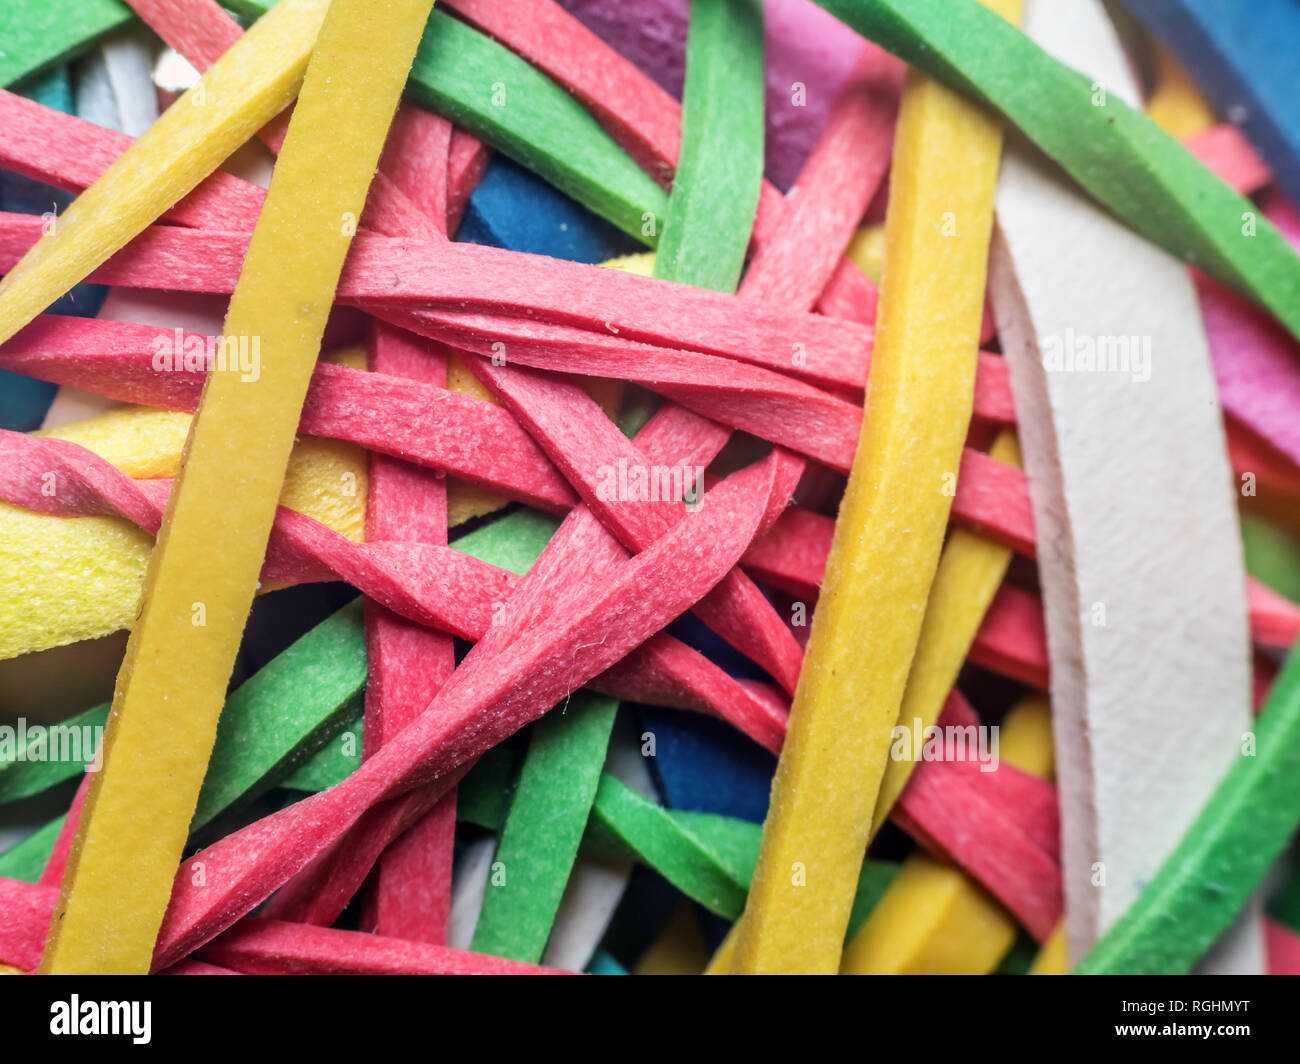 Closeup of tangled colorful rubber bands Stock Photo